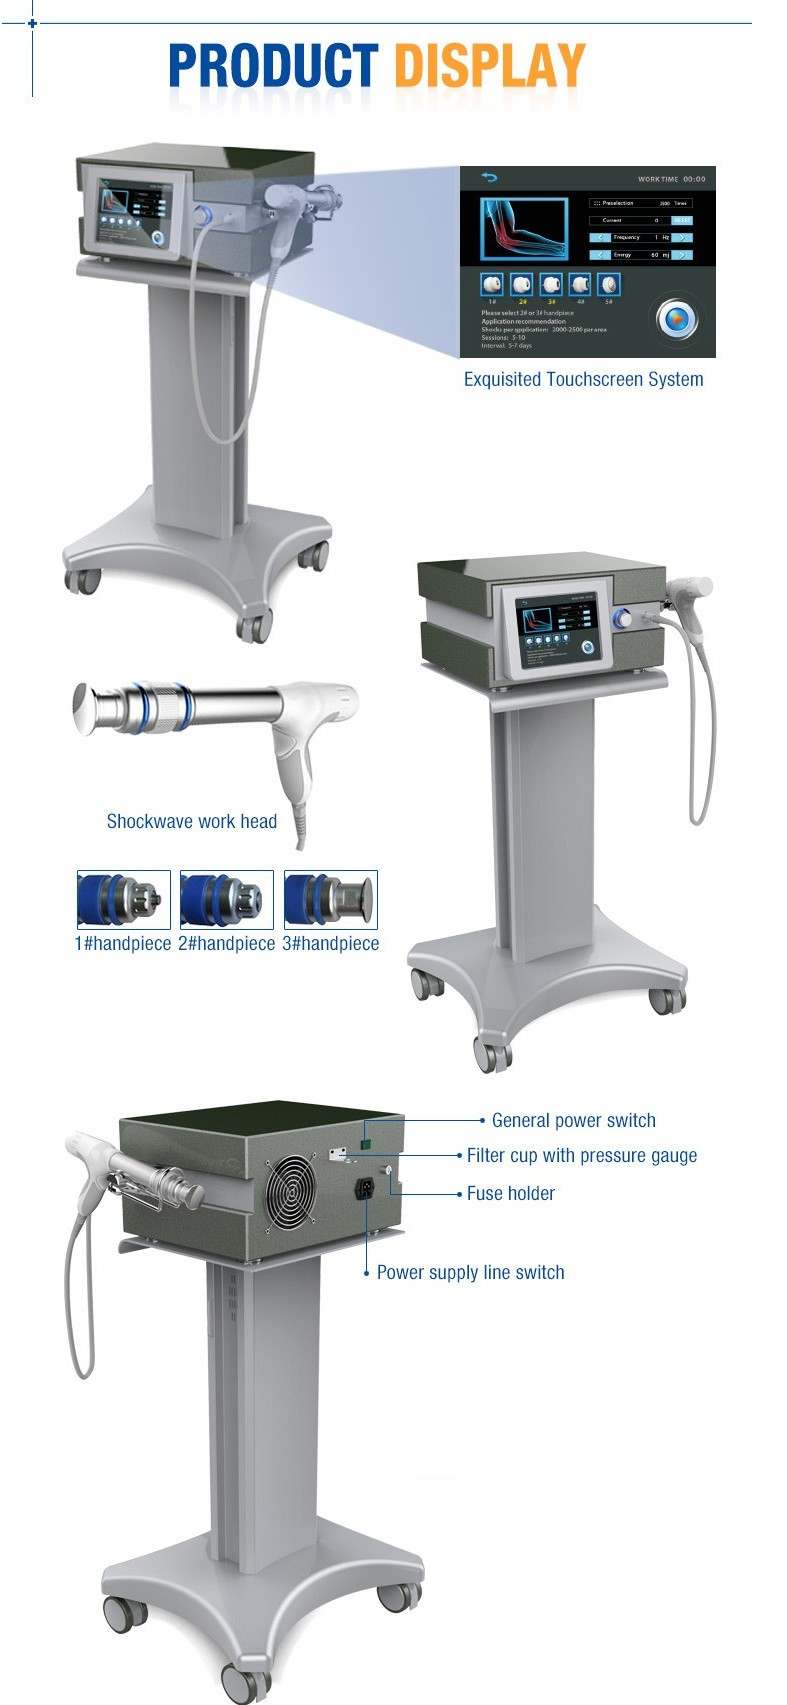 21hz Portable ESWT Extracorporeal Shock Wave Therapy Machine manufacturer